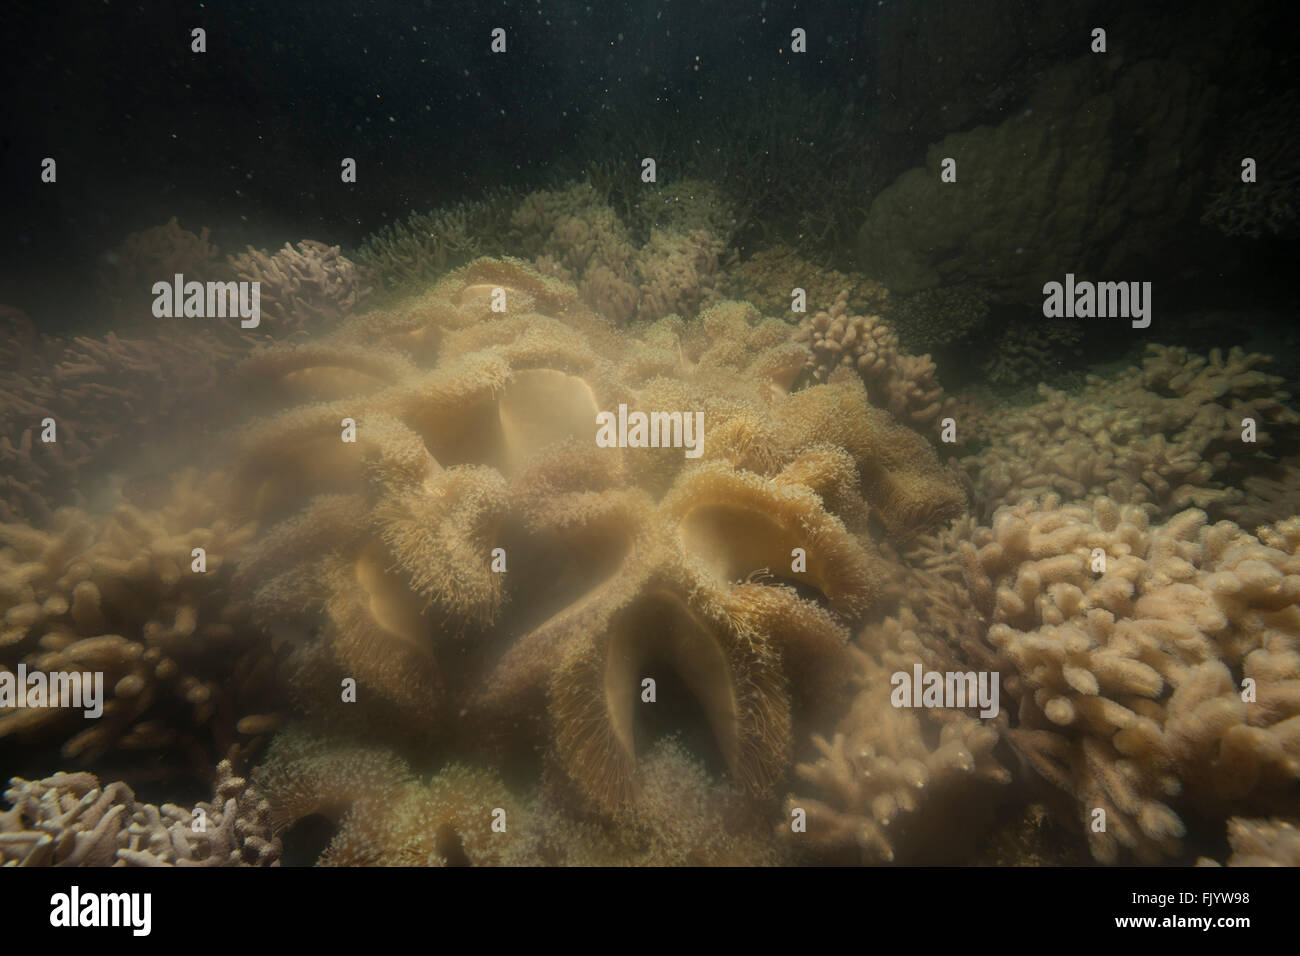 Leather coral (Sarcophyton sp.)spawning during the annual 'mass' coral spawning event, 4 to 5 days after the full moon in Novemb Stock Photo